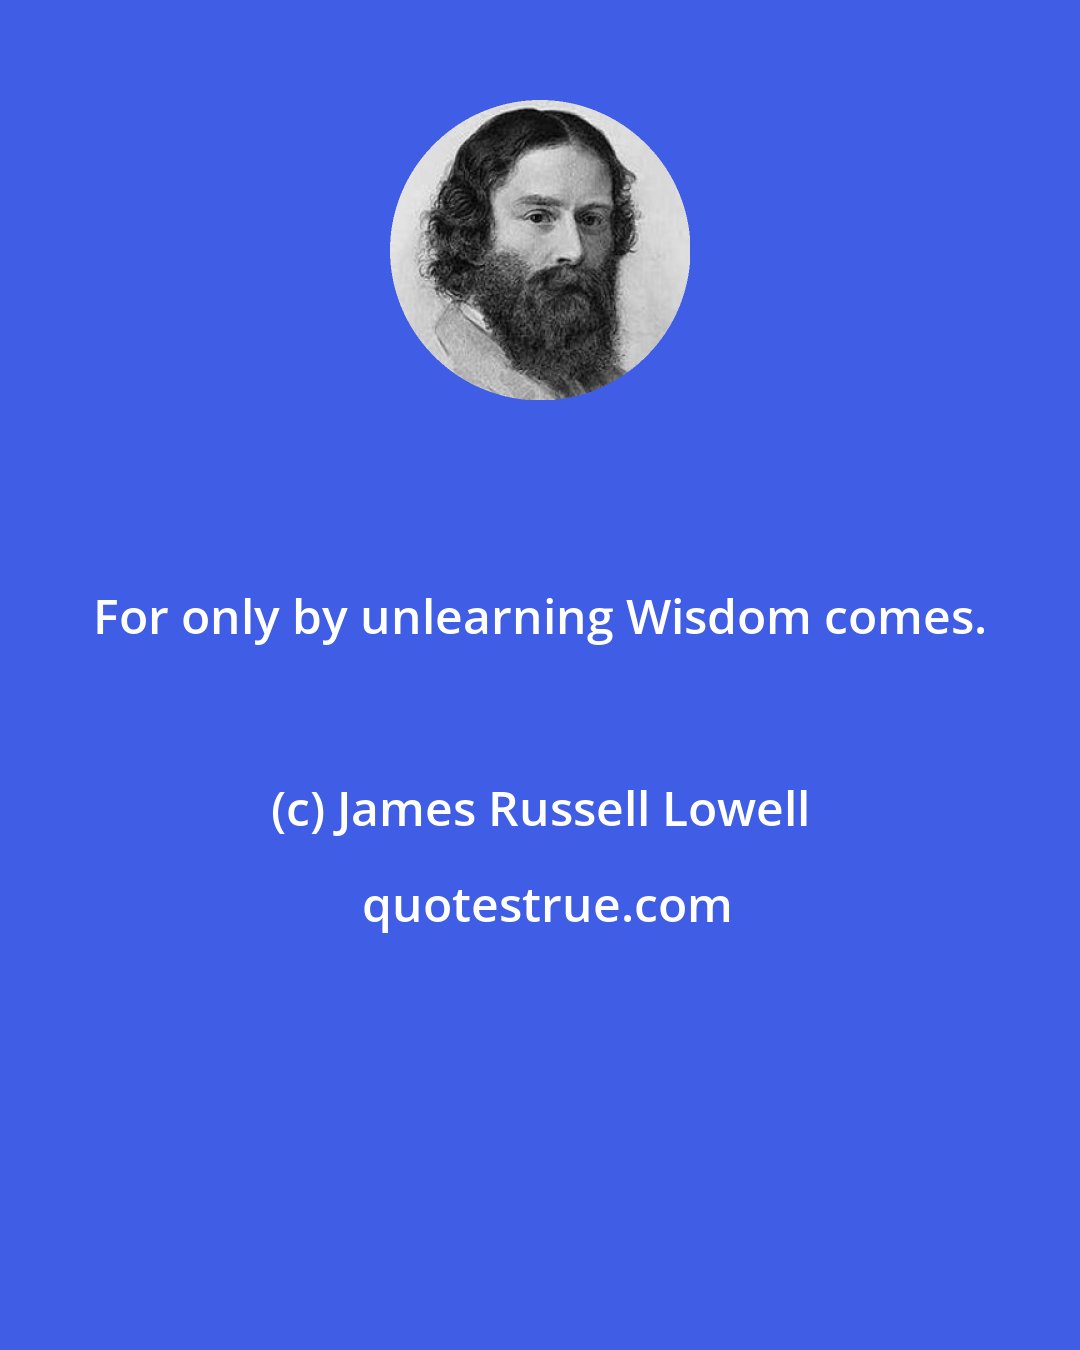 James Russell Lowell: For only by unlearning Wisdom comes.